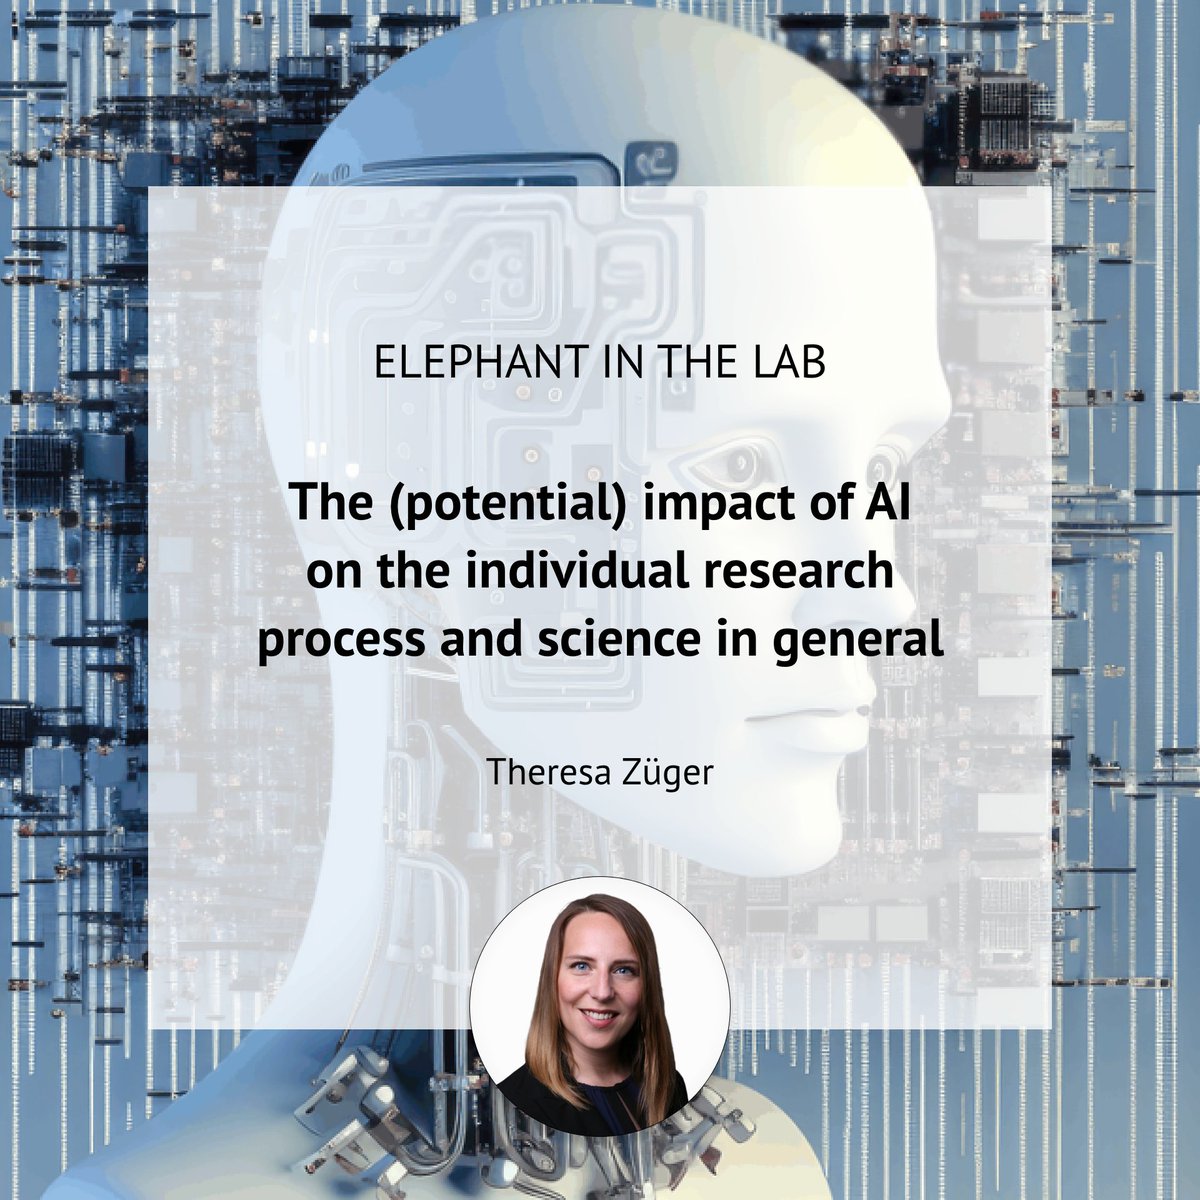 New @eitl_blog: Theresa Züger, head of the Public Interest AI research group @hiig_berlin, talks about the imapct of #AI on her personal day-to-day work in #academia: 👉 elephantinthelab.org/the-potential-…